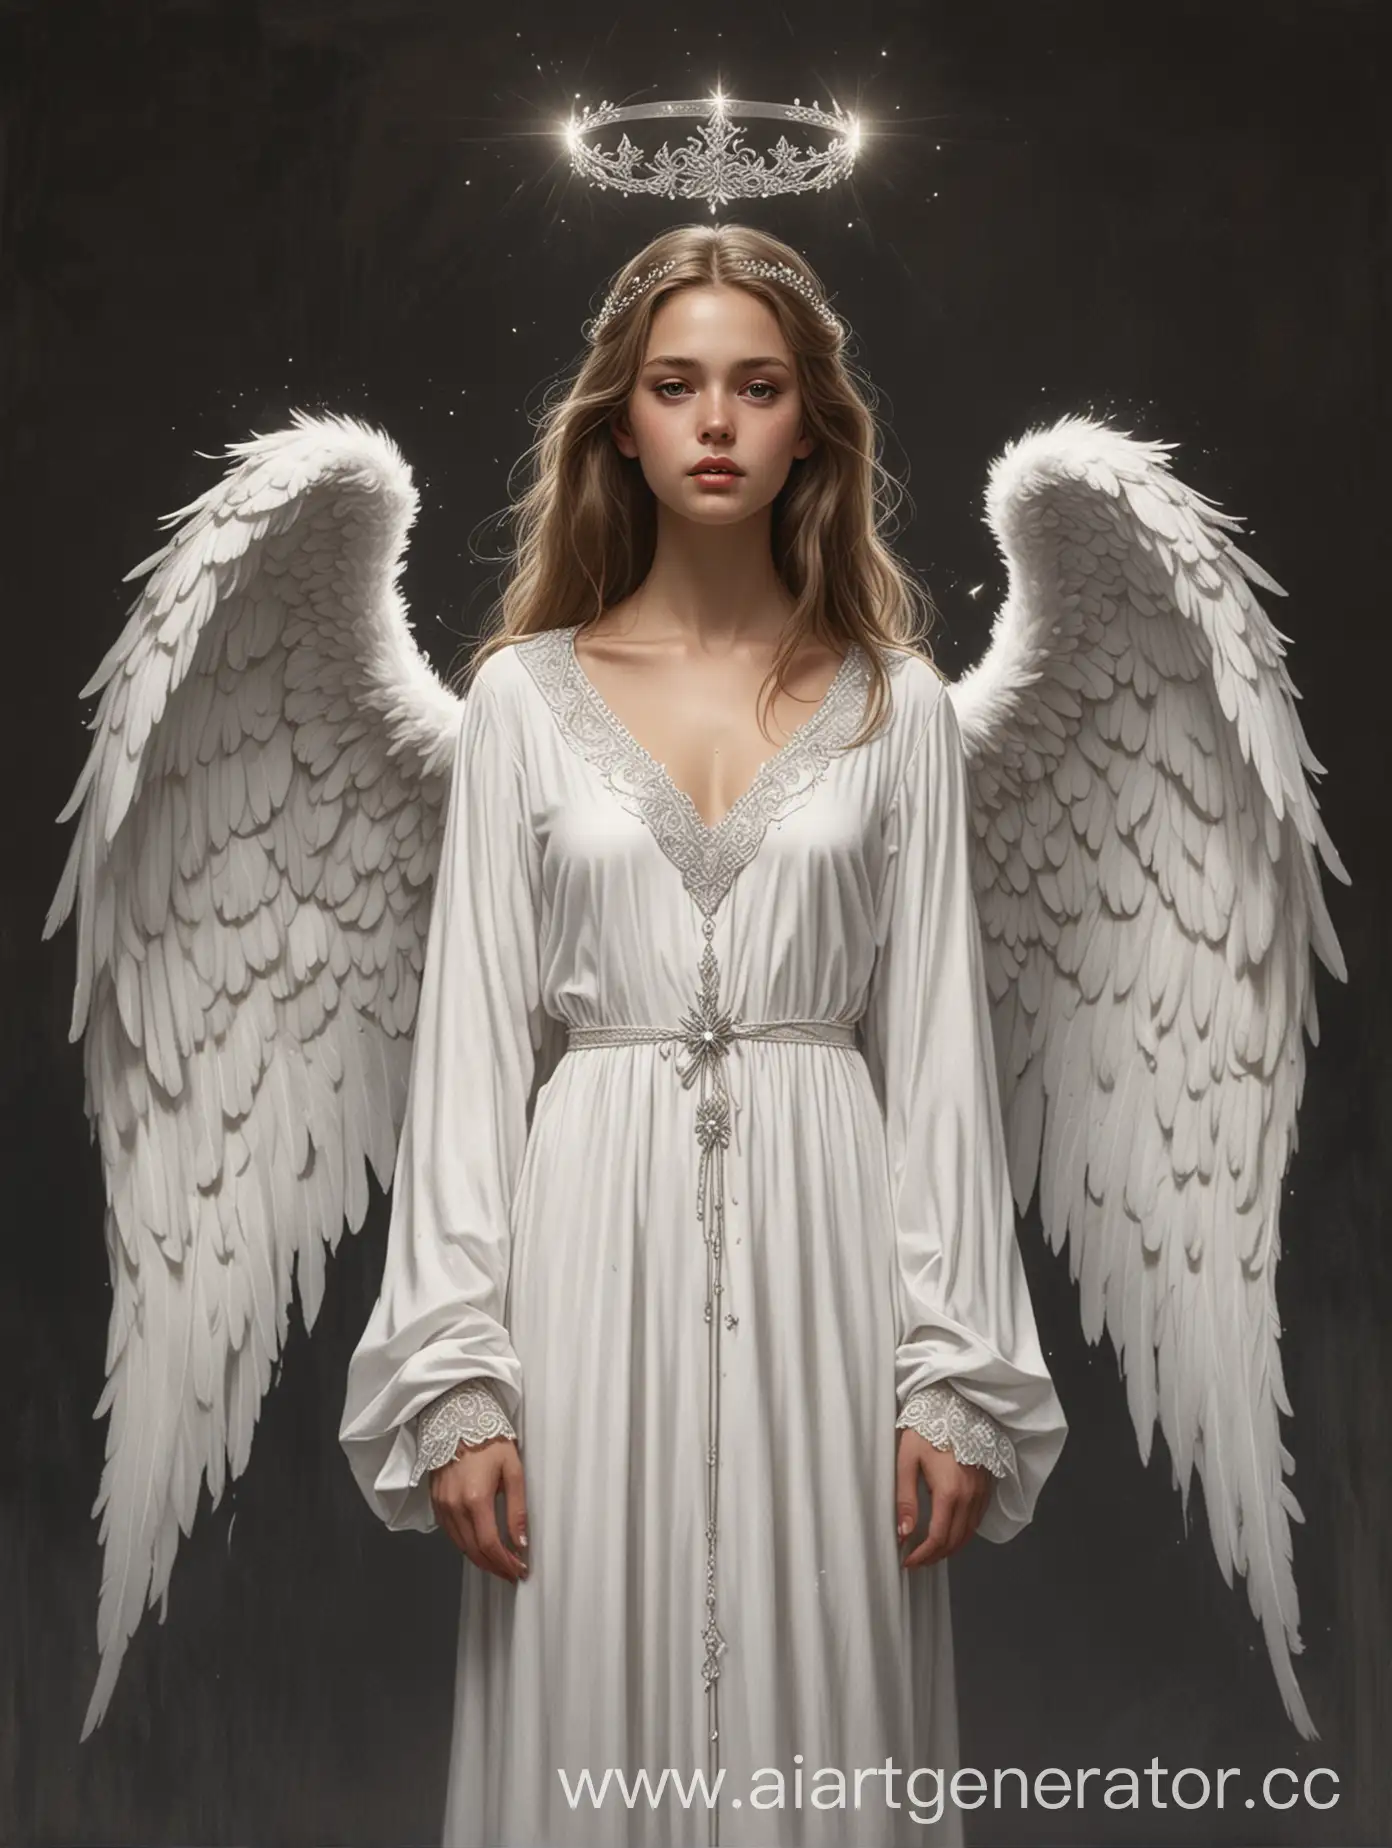 Serene-Angelic-Girl-Graceful-Figure-in-White-Robe-with-Diamond-Crown-and-Angel-Wings